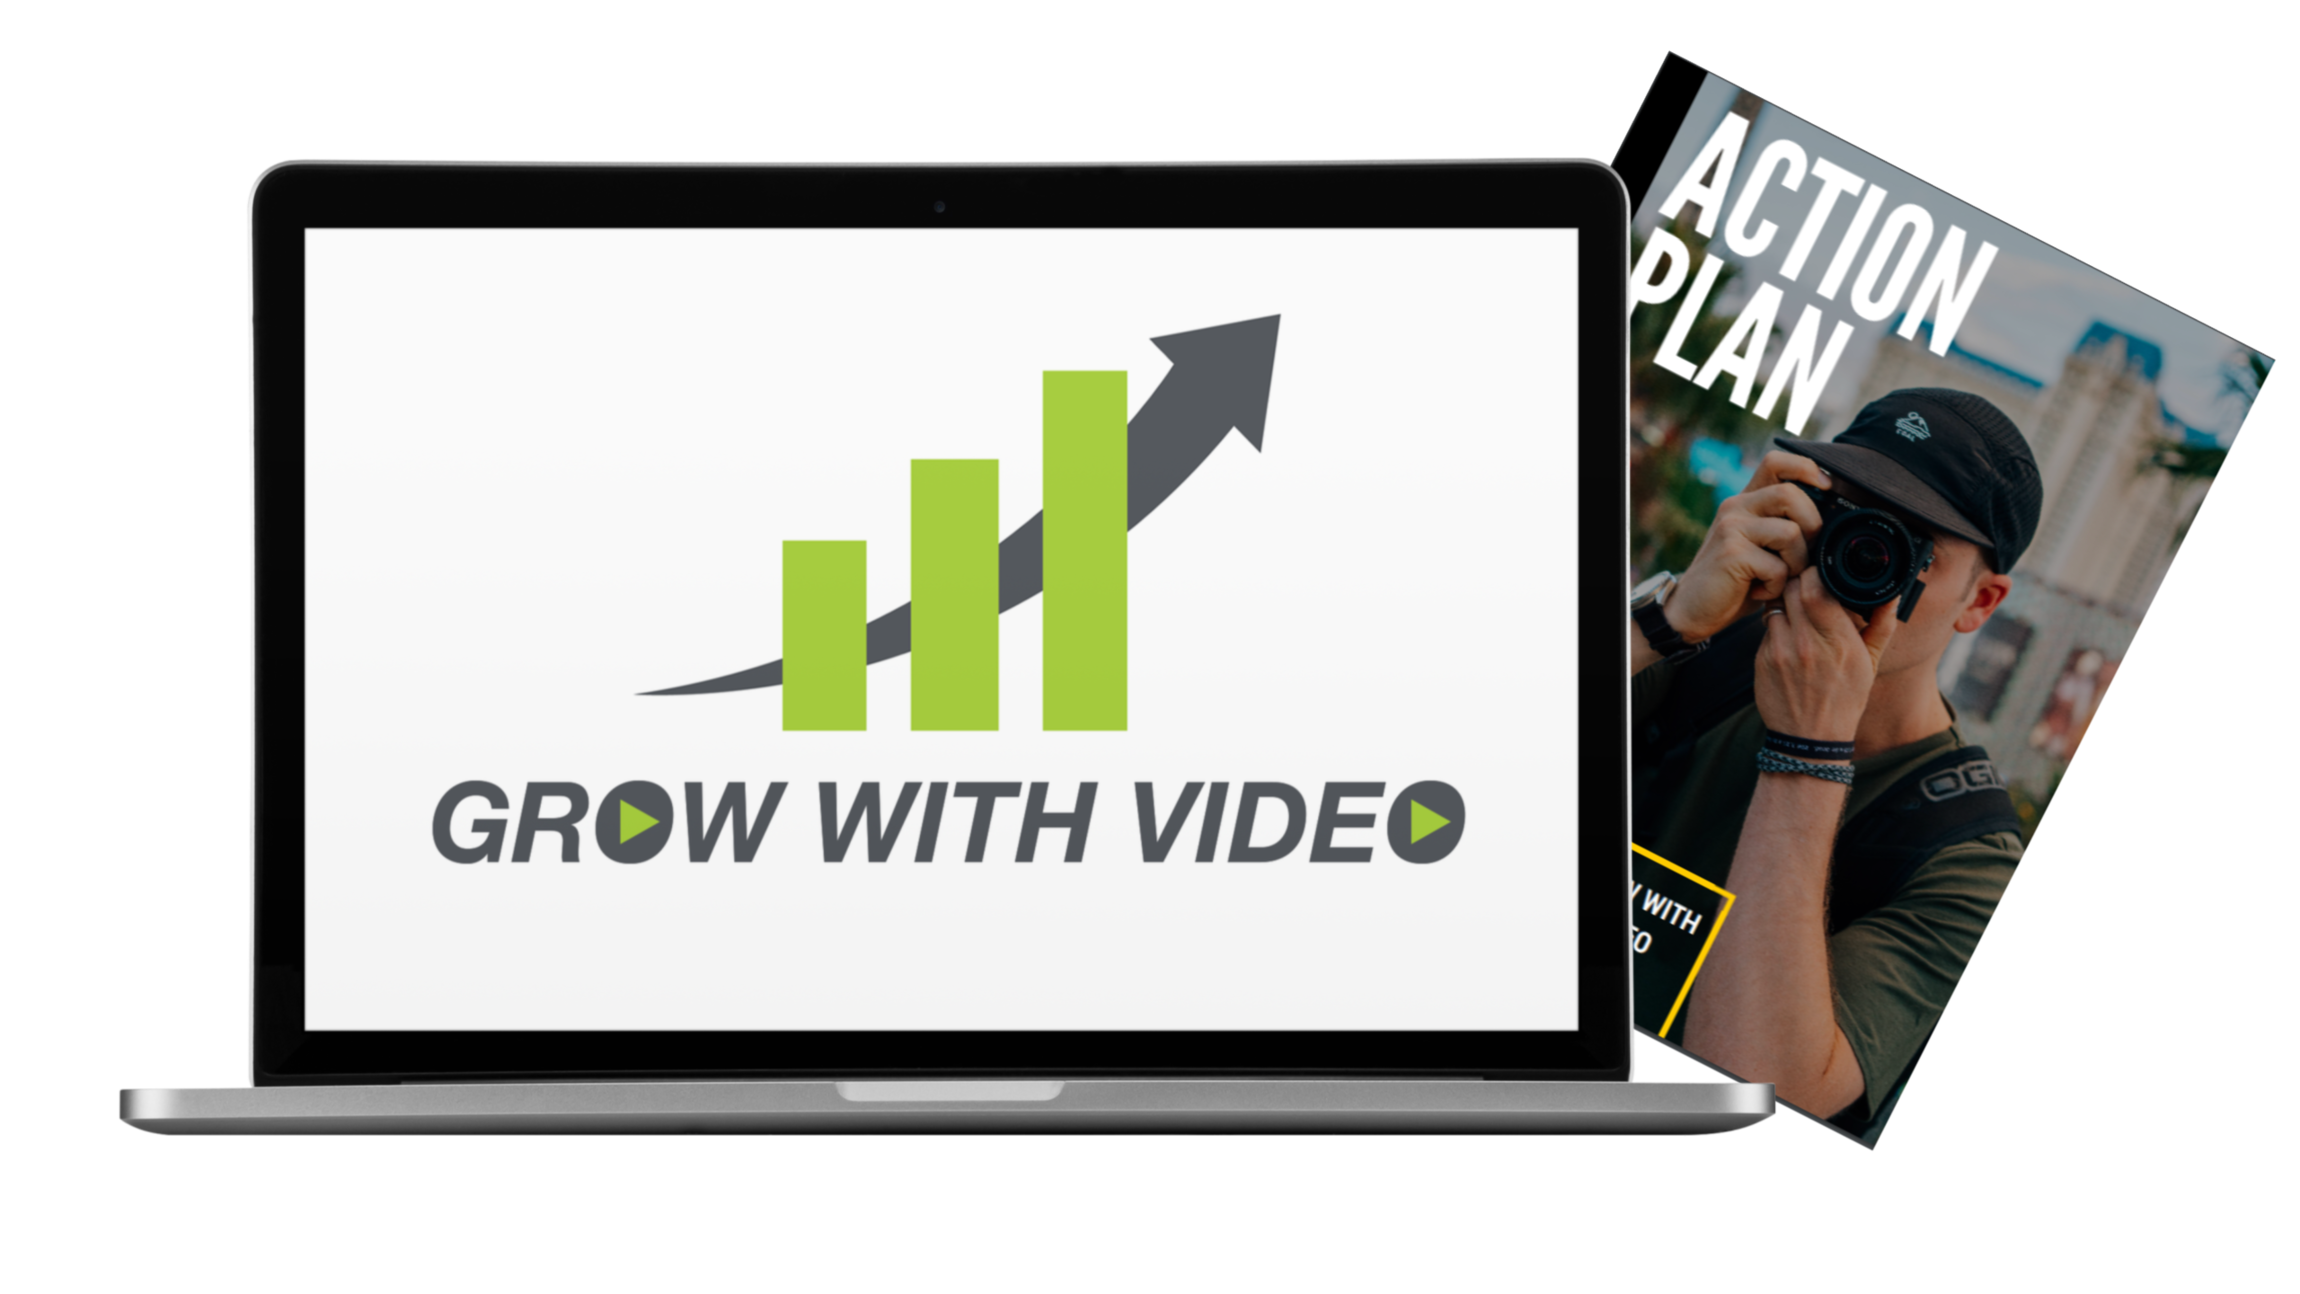 Sean Cannell - Video Ranking Academy 2.0 2020 1